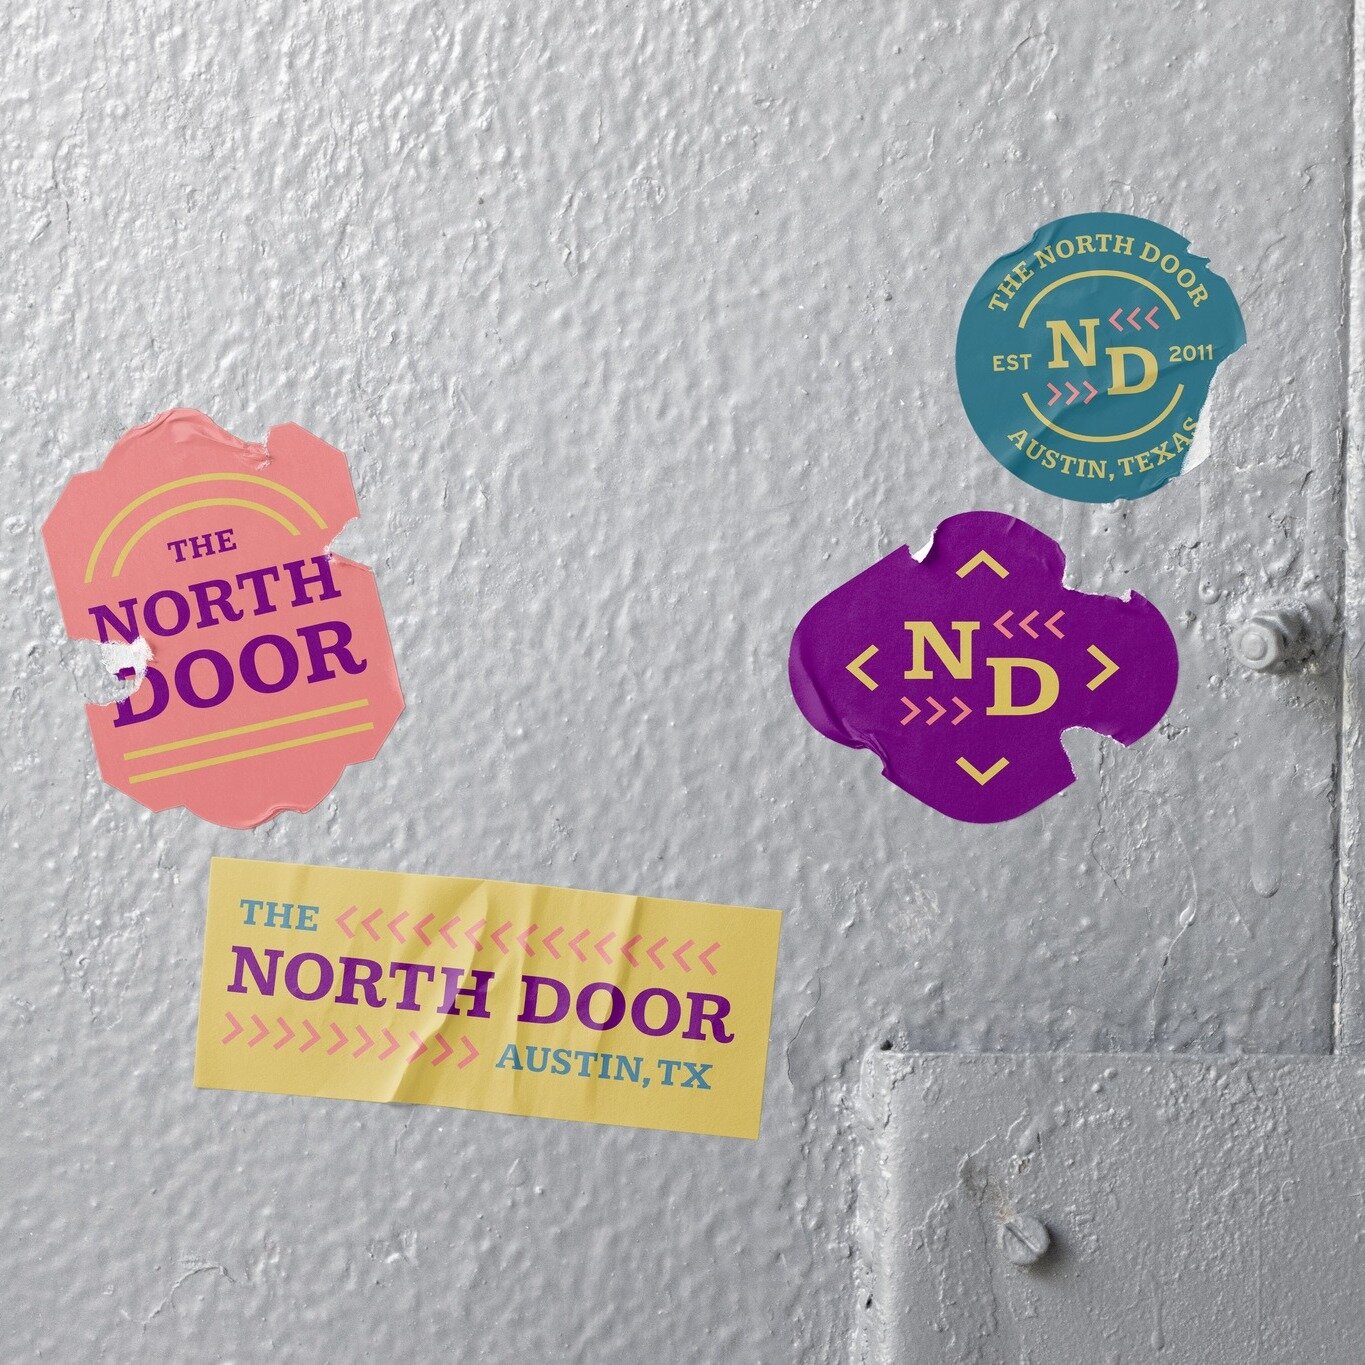 A branding project is never complete without cool merchandises! Let us help you showcase your new brand in fun and creative ways. After developing the new brand for the North Door, we helped them design and source stickers, t-shirts, hoodies, enamel 